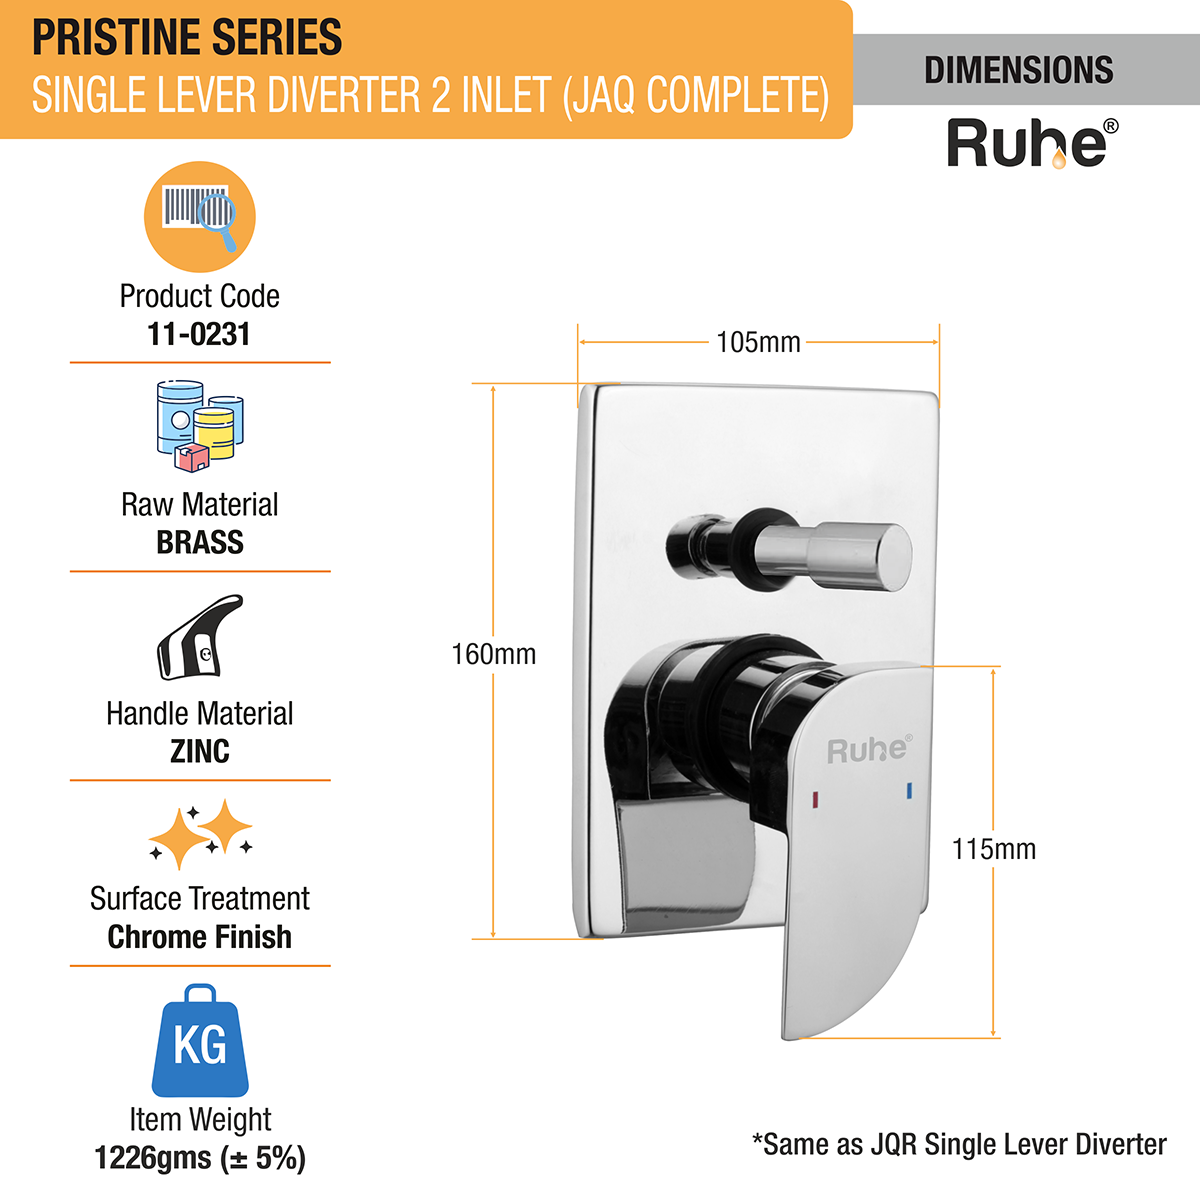 Pristine Single Lever 2-inlet Diverter (JAQ Complete Set) dimensions, raw material, item weight